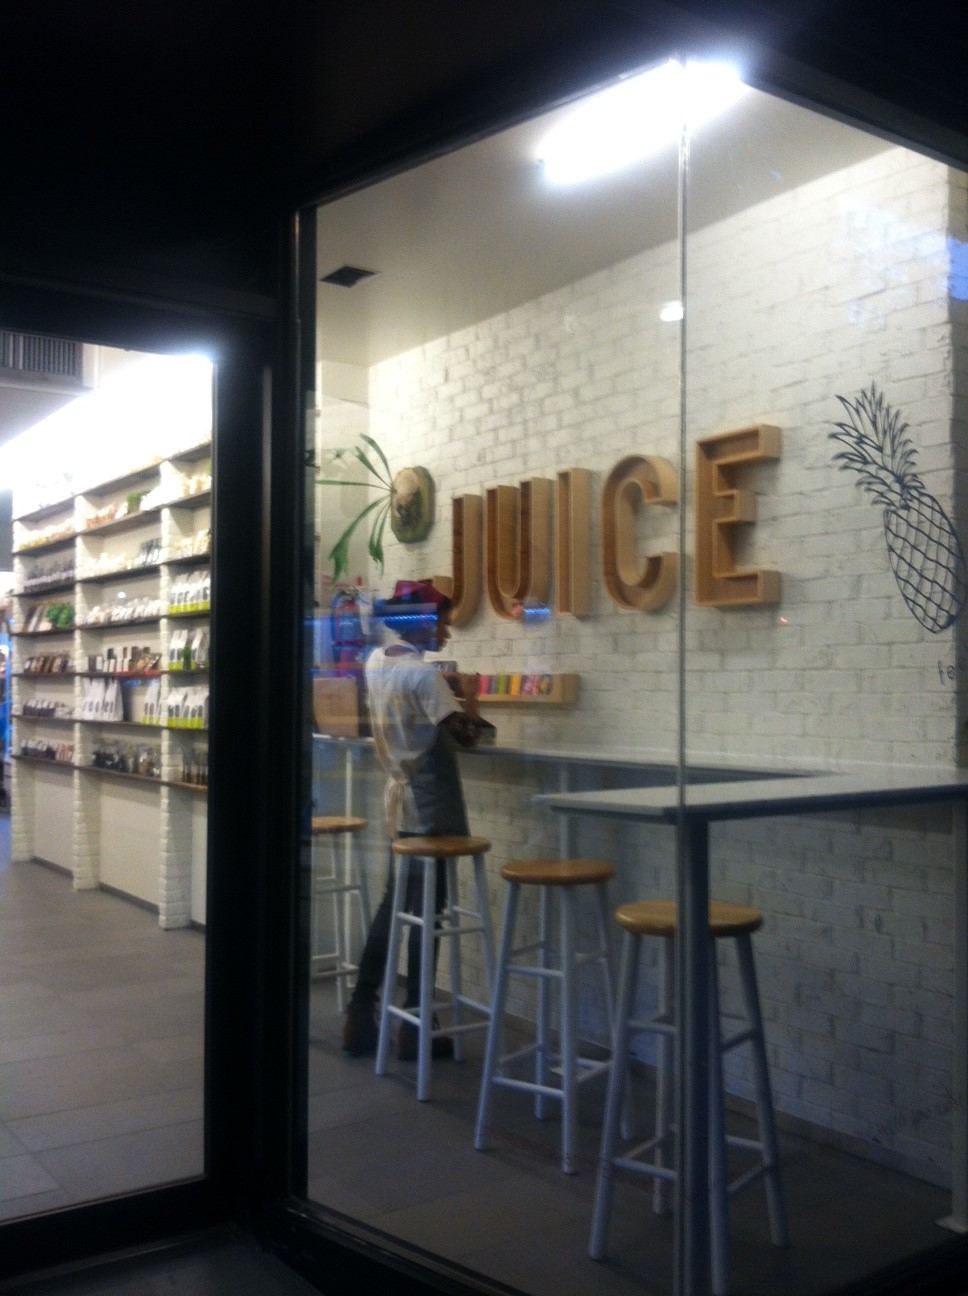 The entrance of Feel Food, an organic juice bar that recently opened in Greenwich Village. (Amelia Pang/Epoch Times)